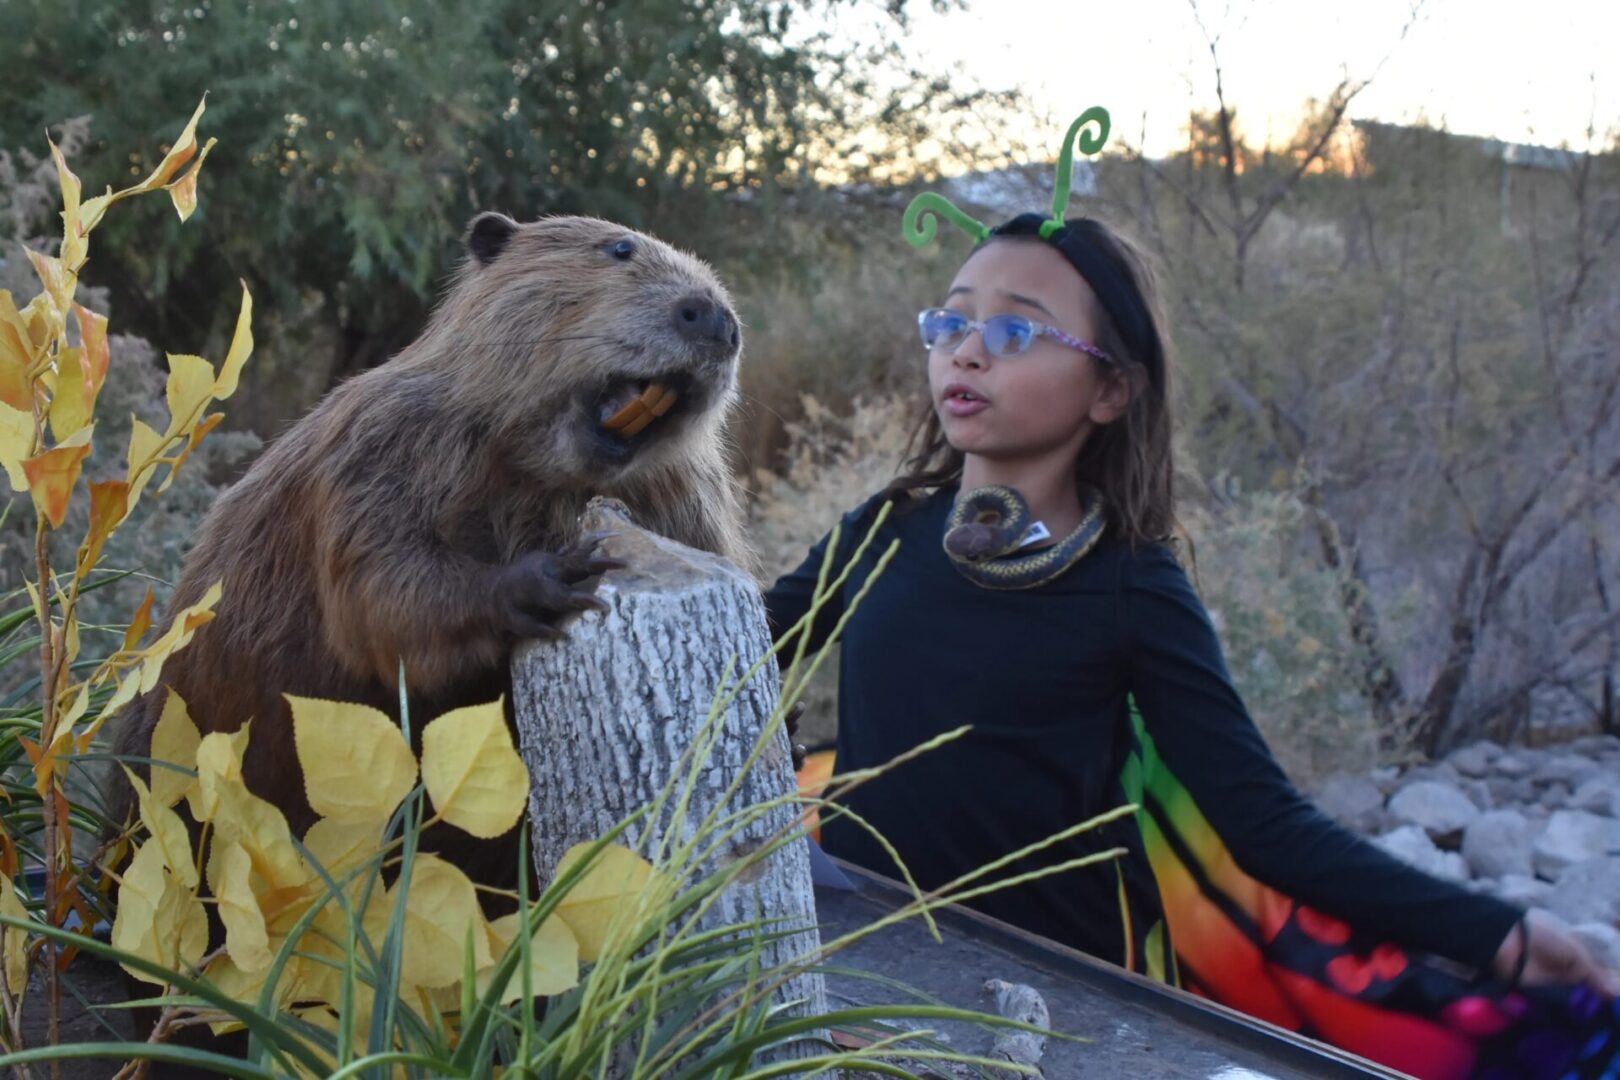 A girl is standing next to a beaver.